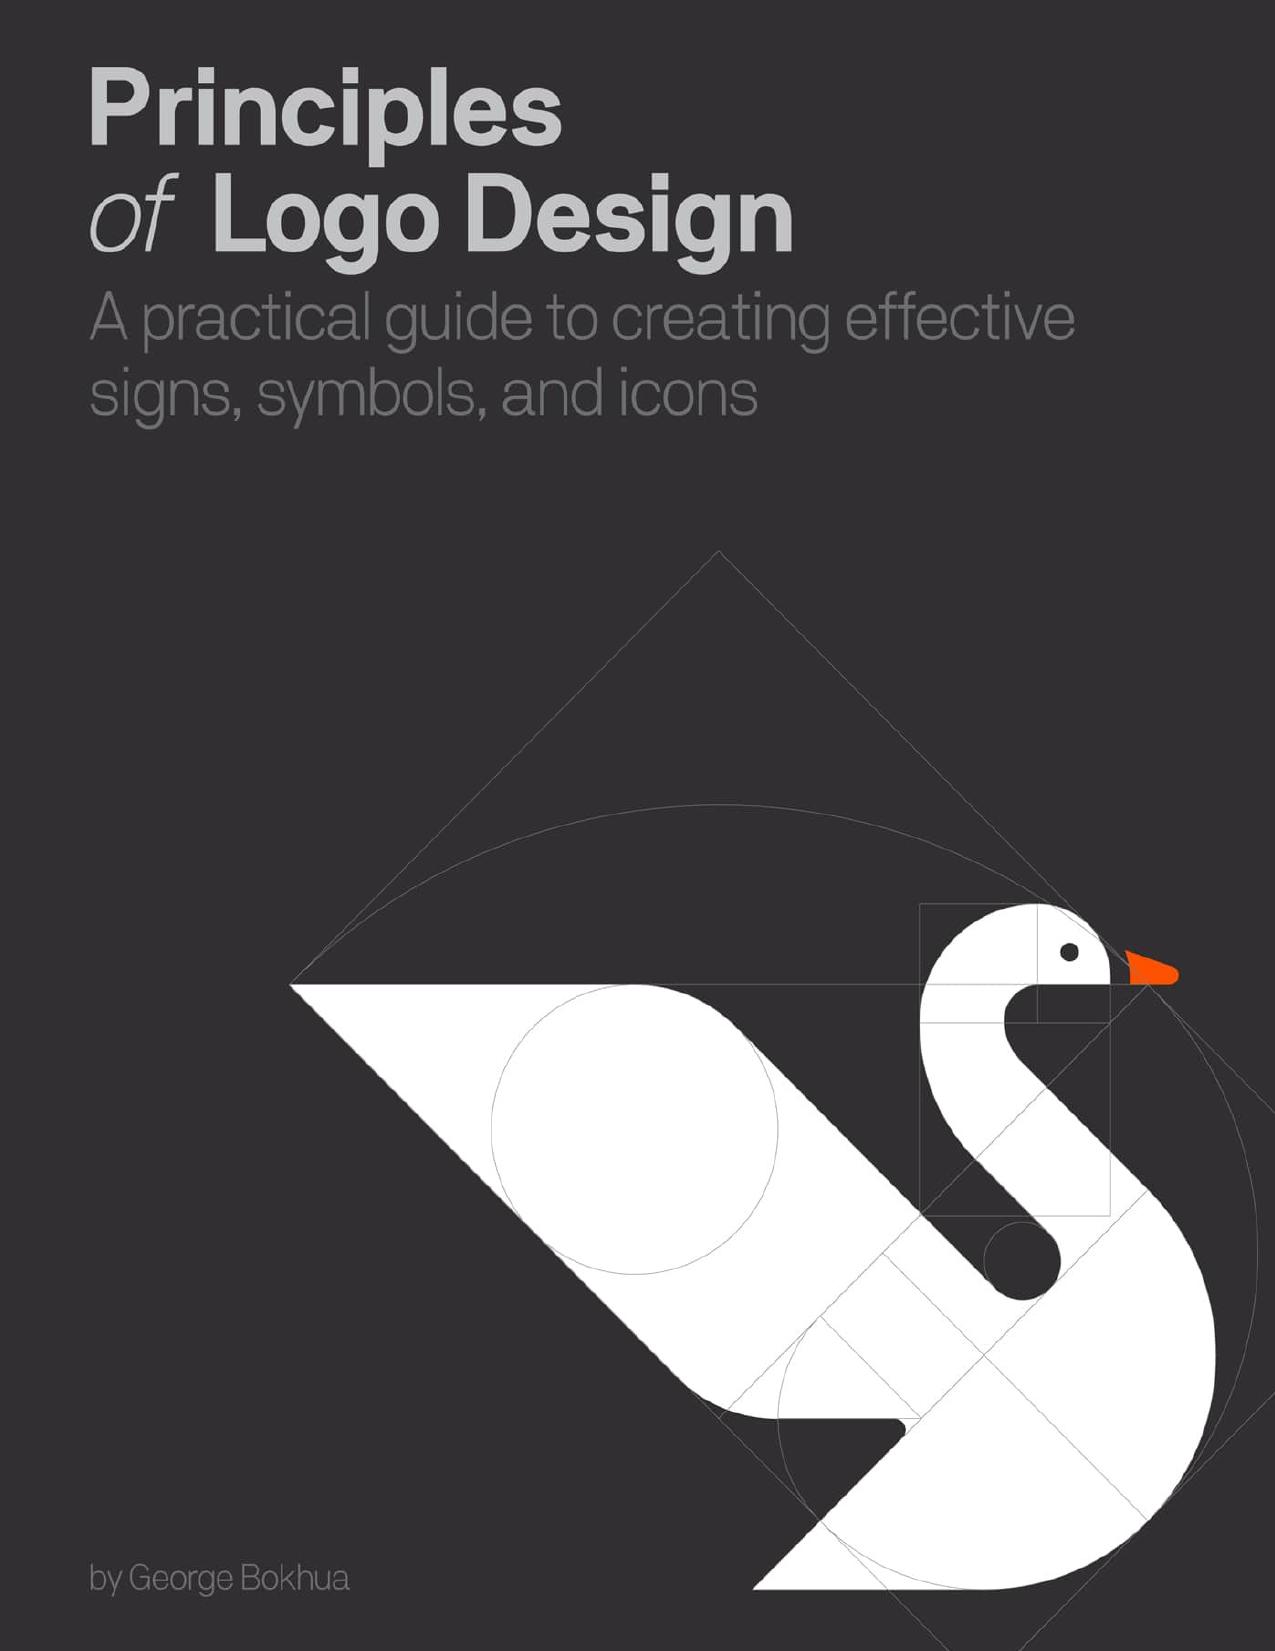 Principles of Logo Design by George Bokhua